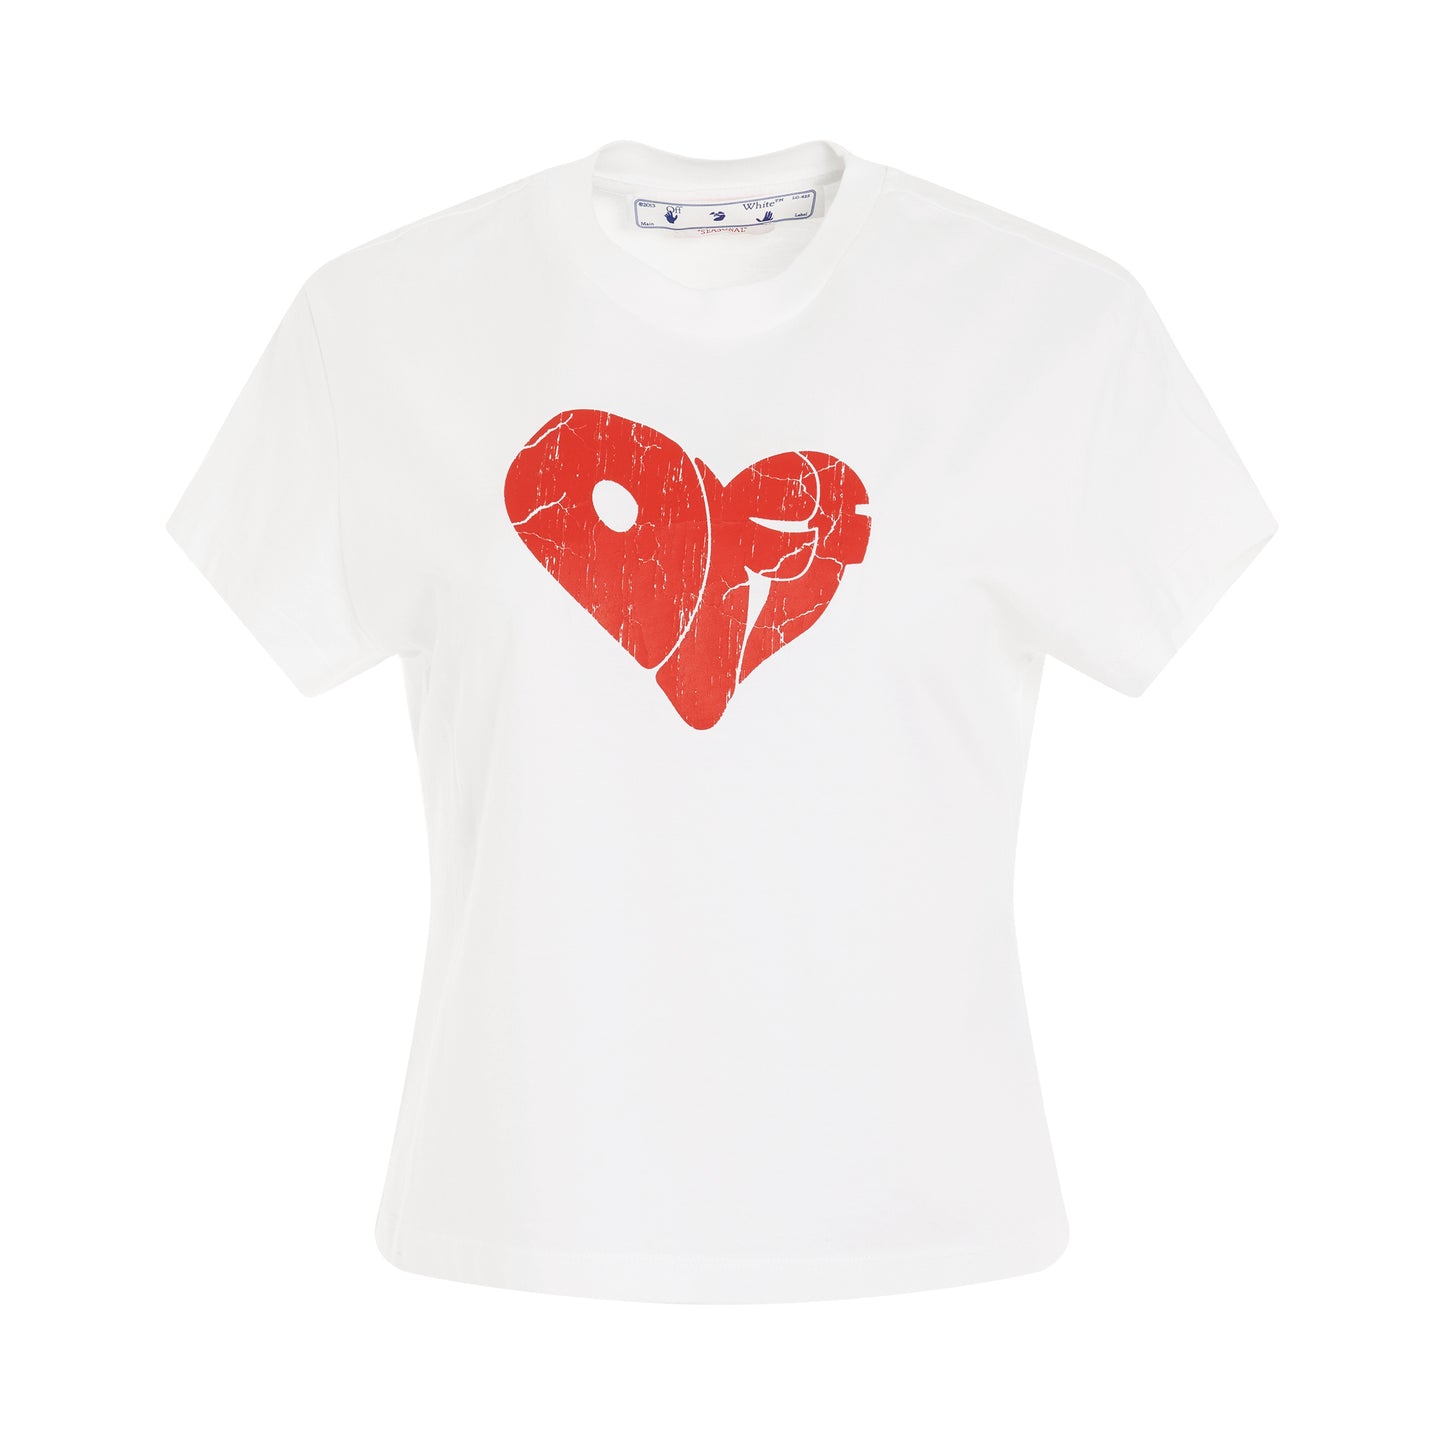 Crack Off Heart Fitted T-Shirt in White/Red